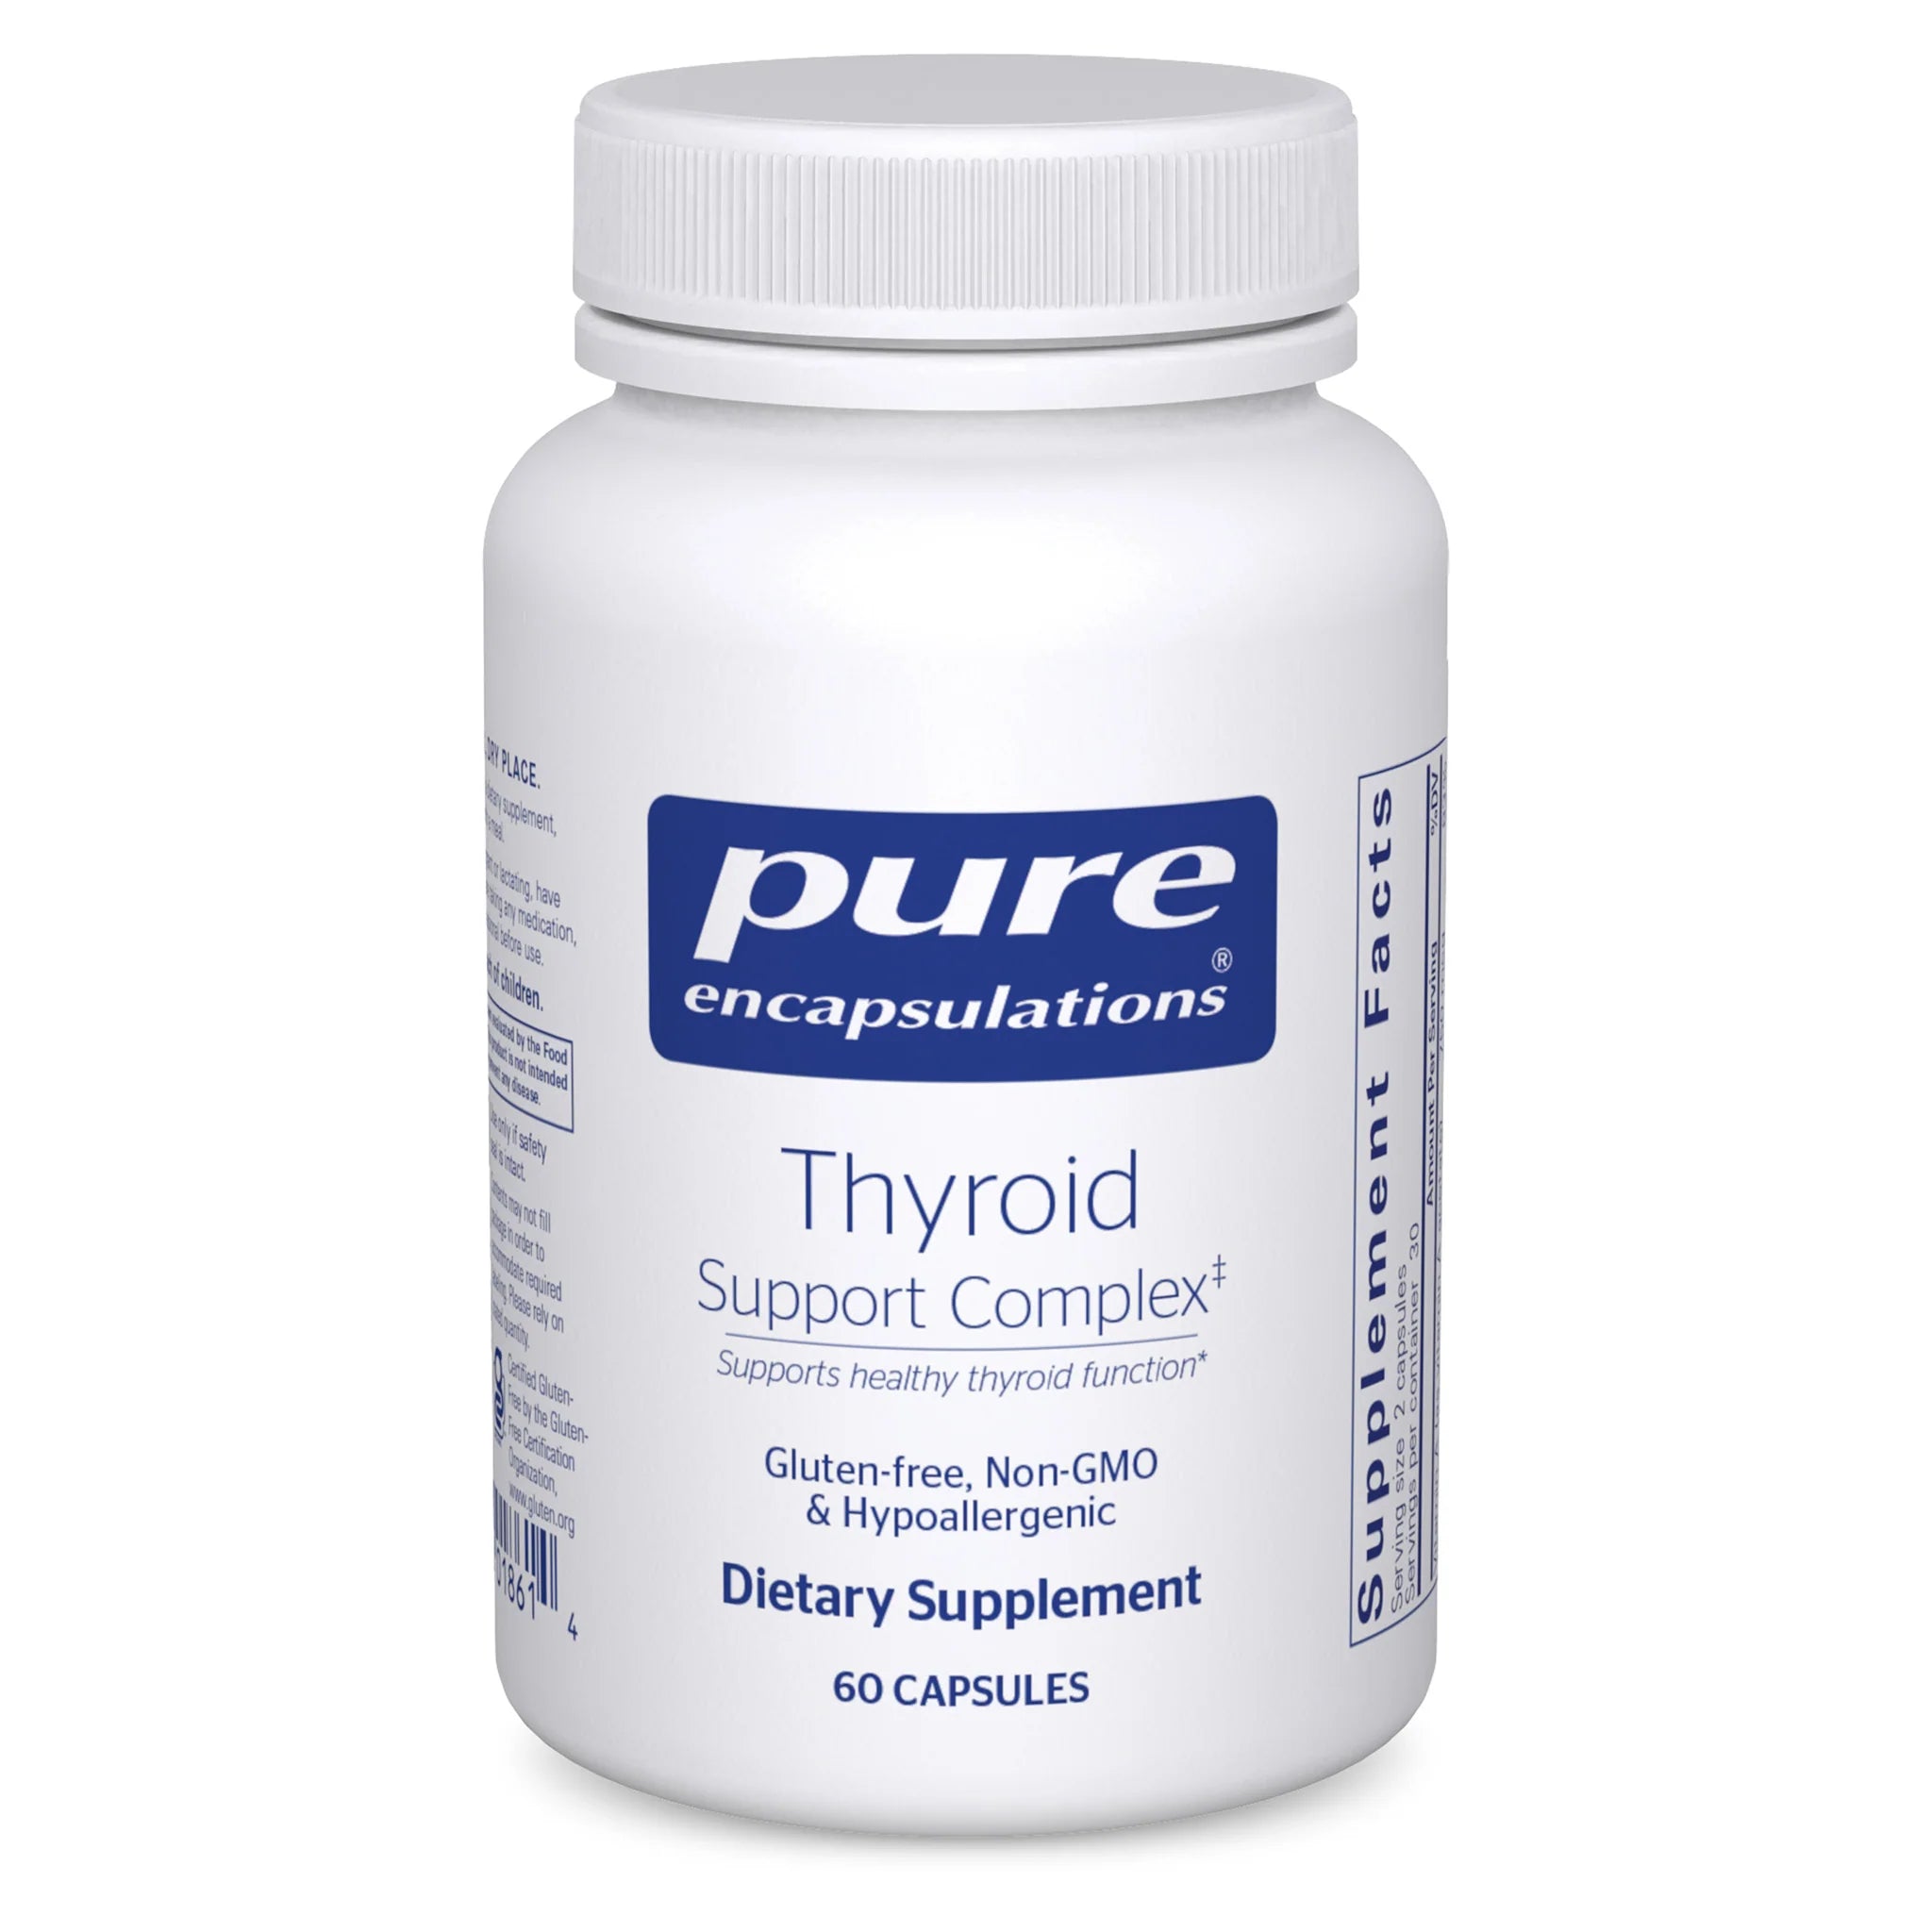 Thyroid Support Complex‡